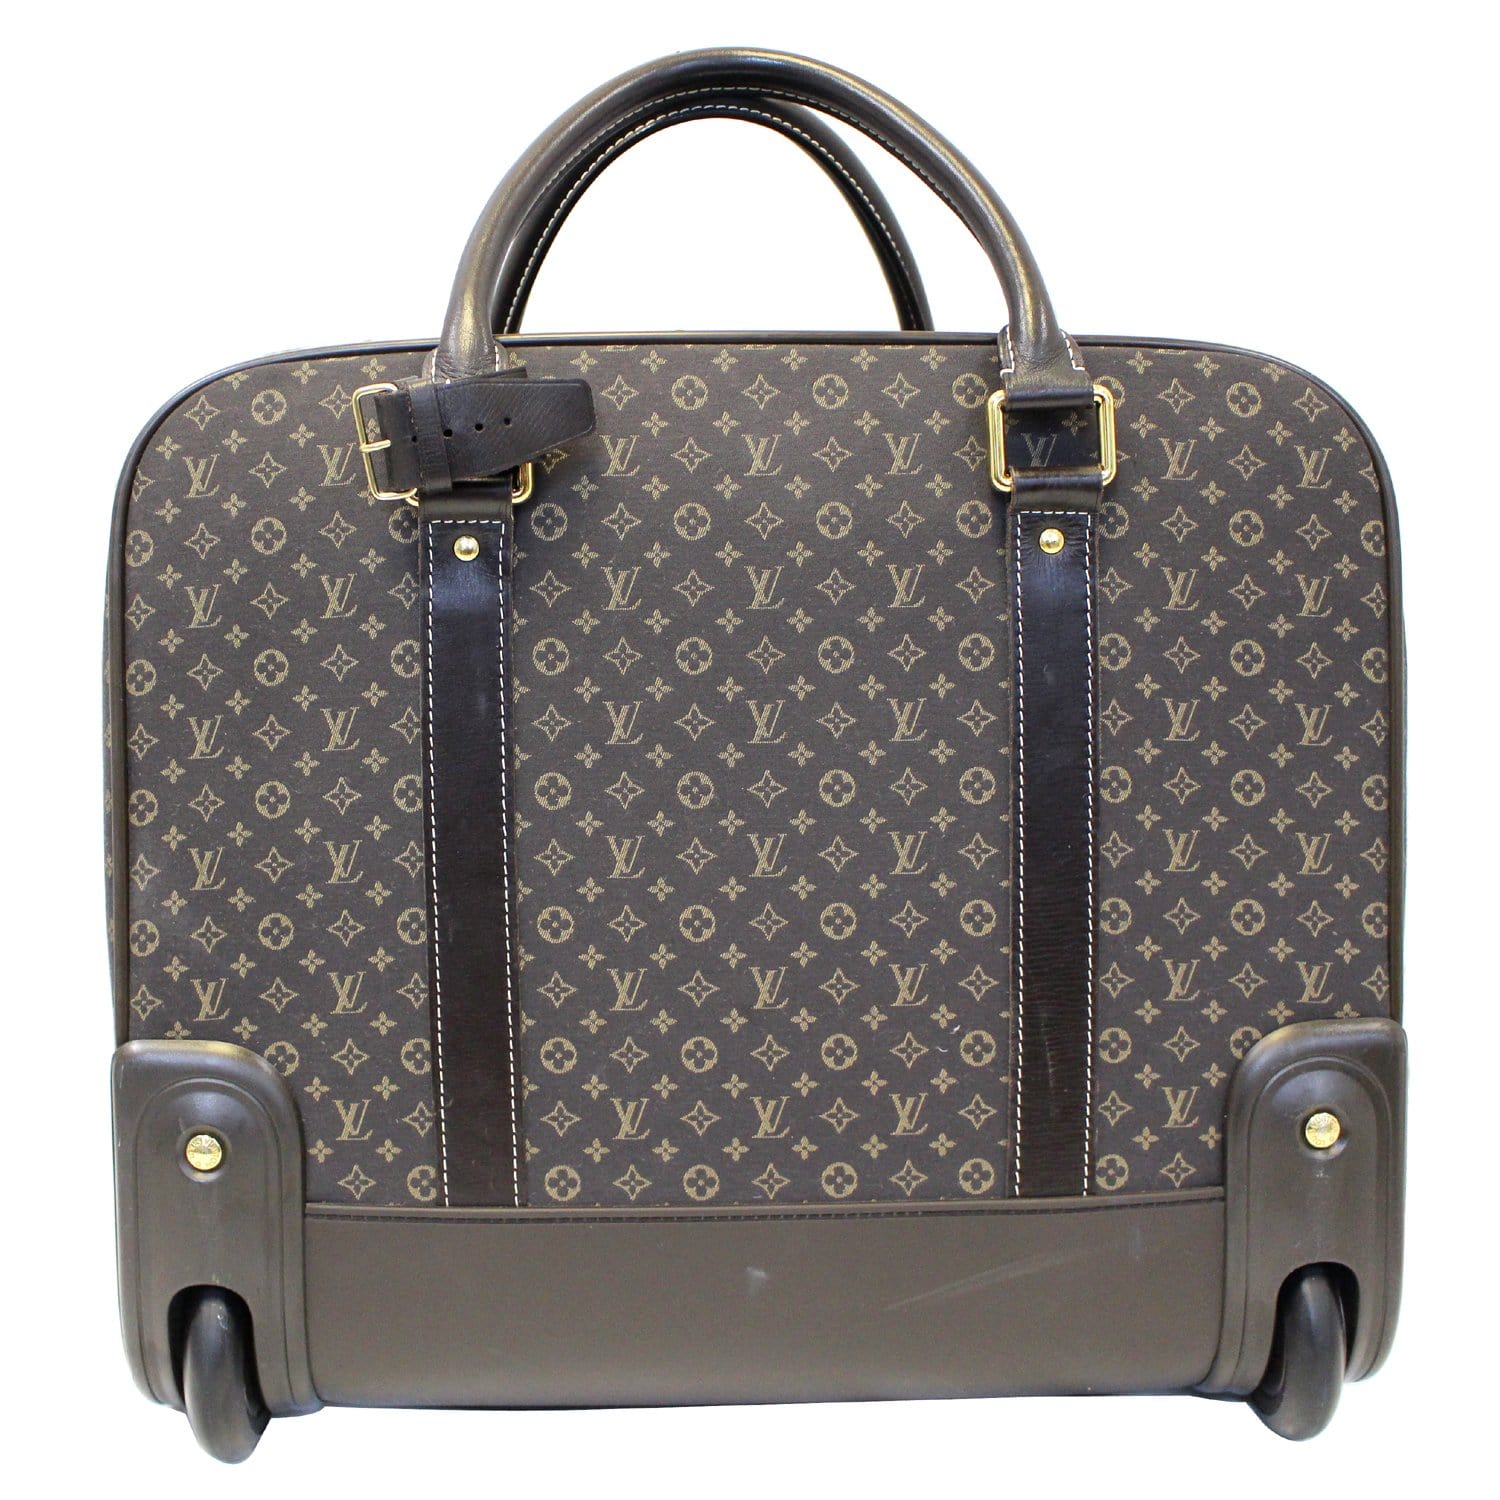 MANIFESTO - MARC NEWSON'S ALL ABOUT BUSINESS AND CLASS: Louis Vuitton's  Pégase Rolling Luggage